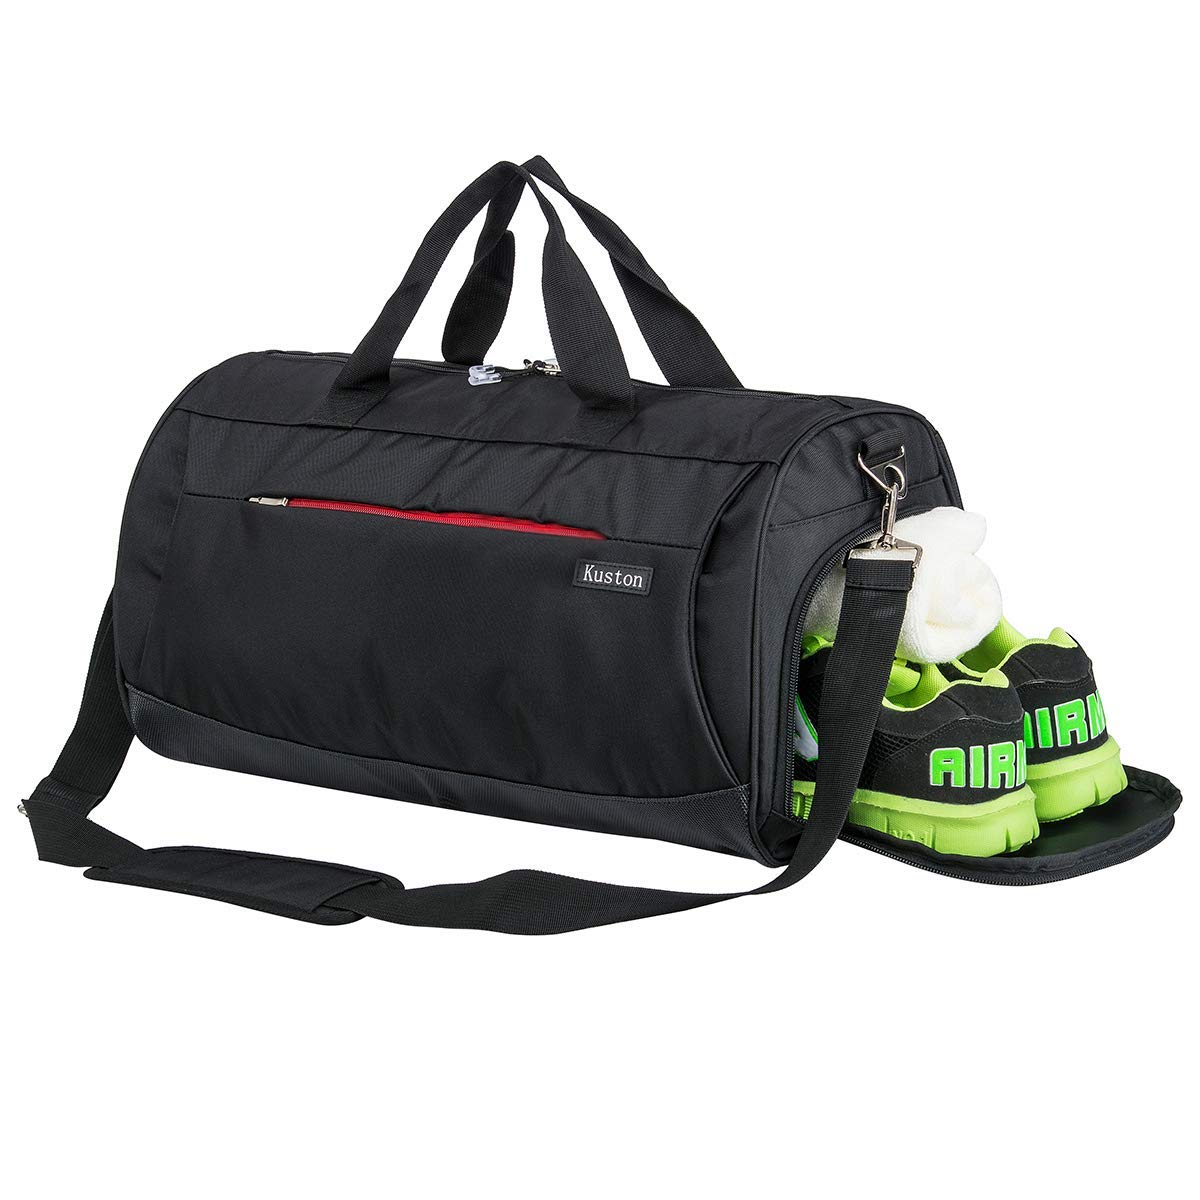 Kuston Sports Gym Bag with Shoes Compartment Travel Duffel Bag 